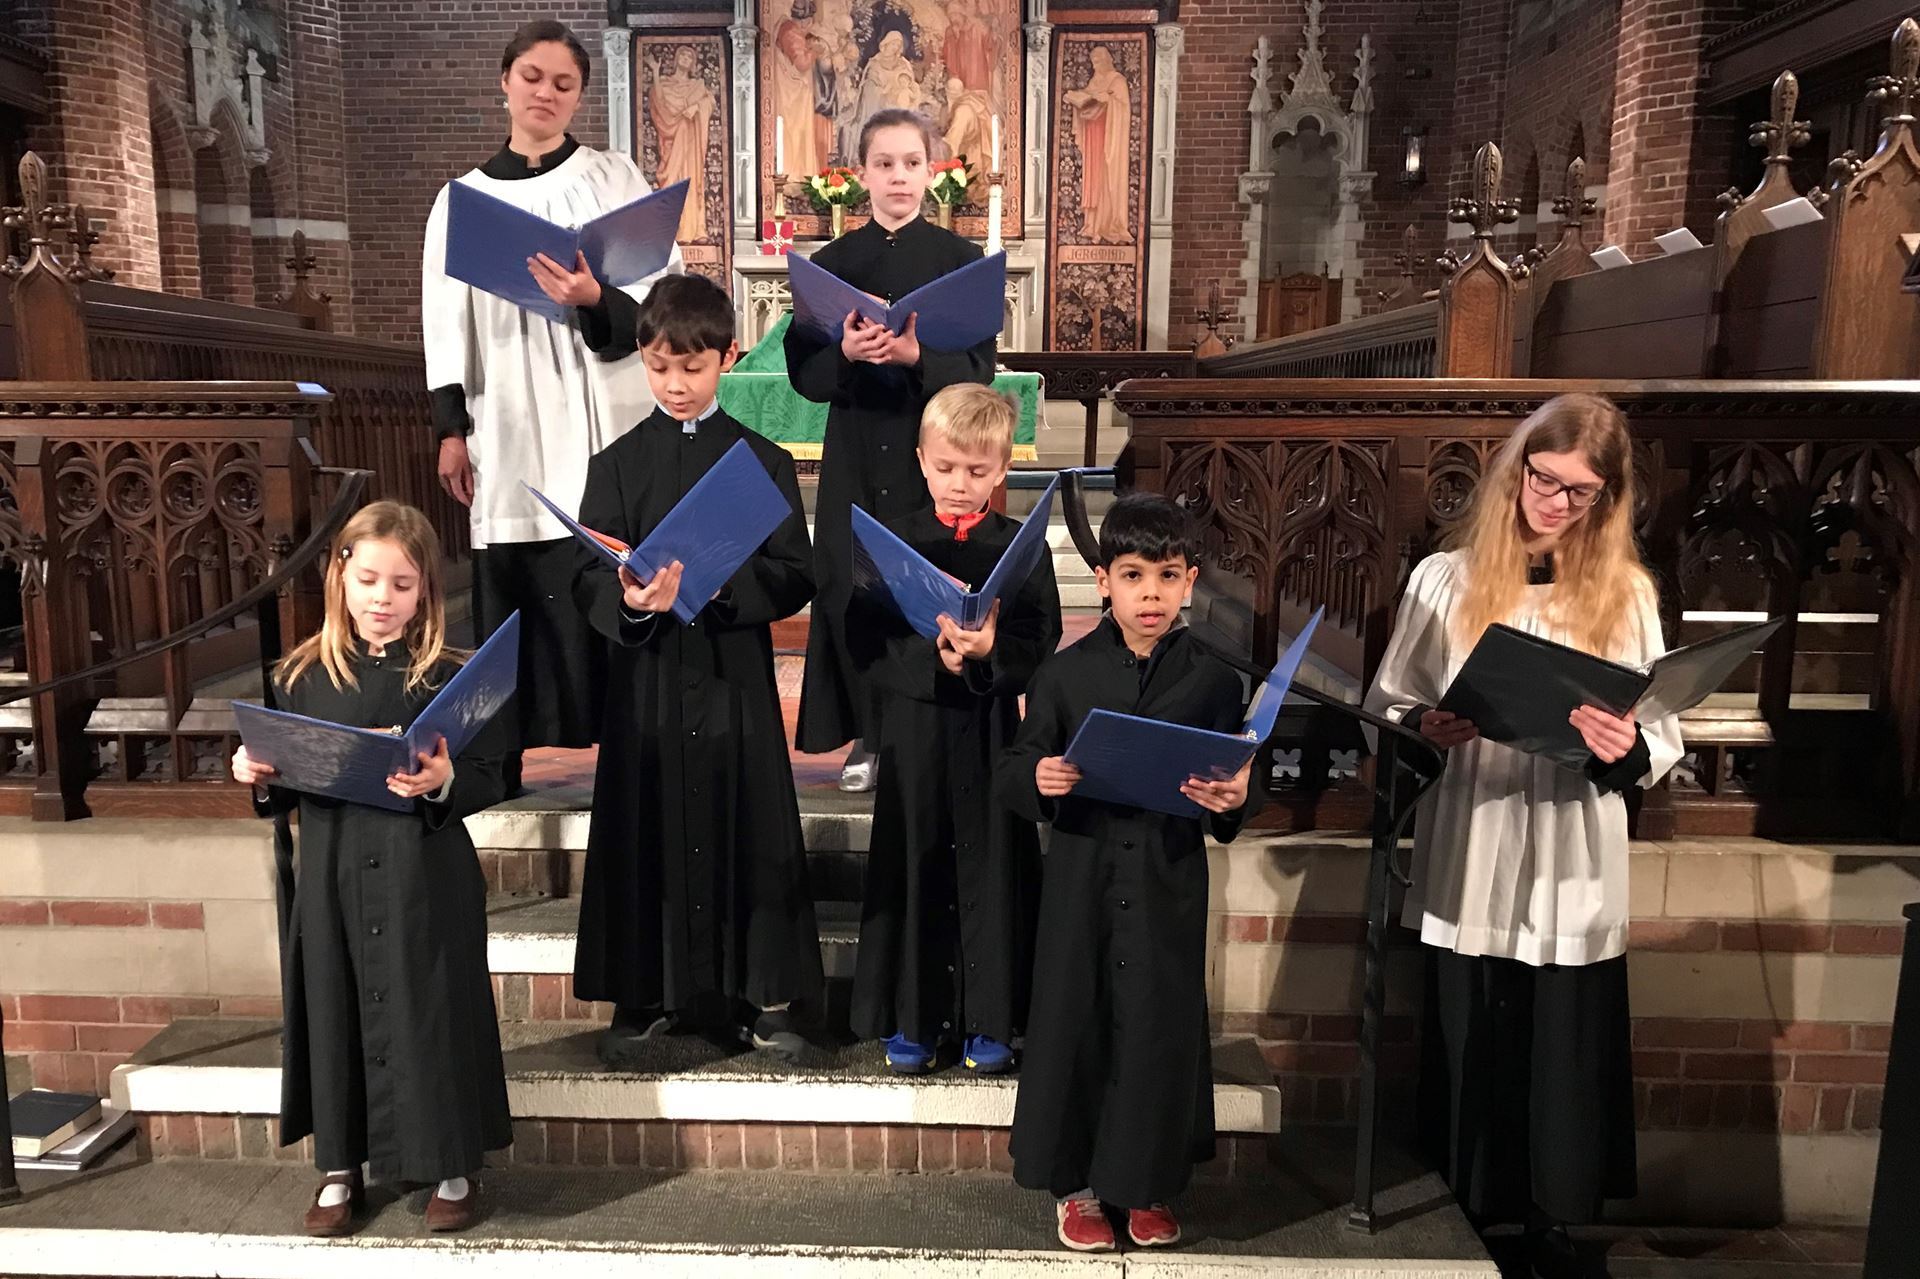 Seven robed children singing in the chancel of Parish of the Epiphany